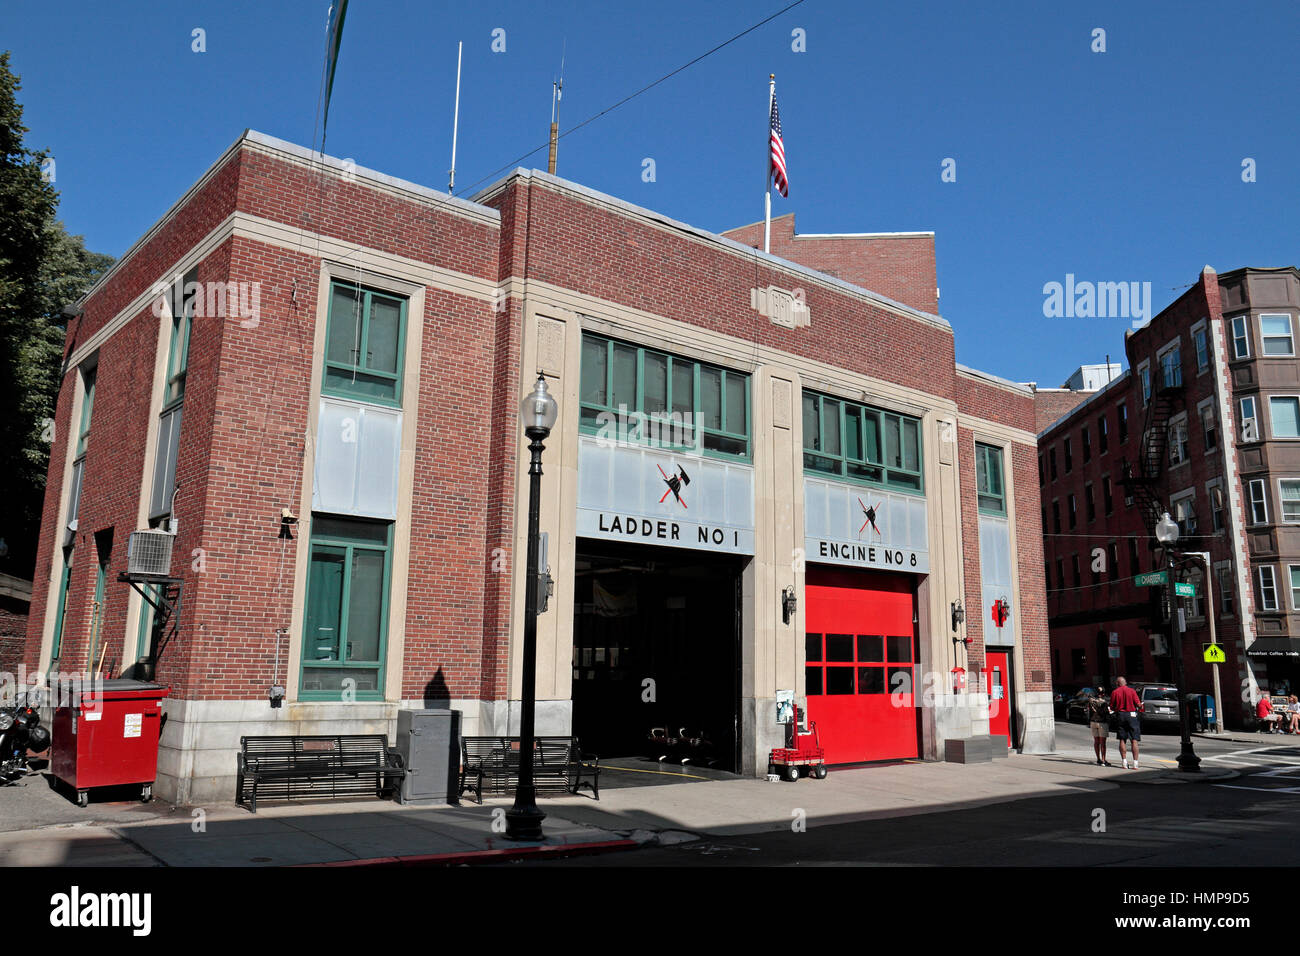 Boston Fire Department fire station for Ladder No 1 and Engine No 8, Boston, Massachusetts, United States. Stock Photo